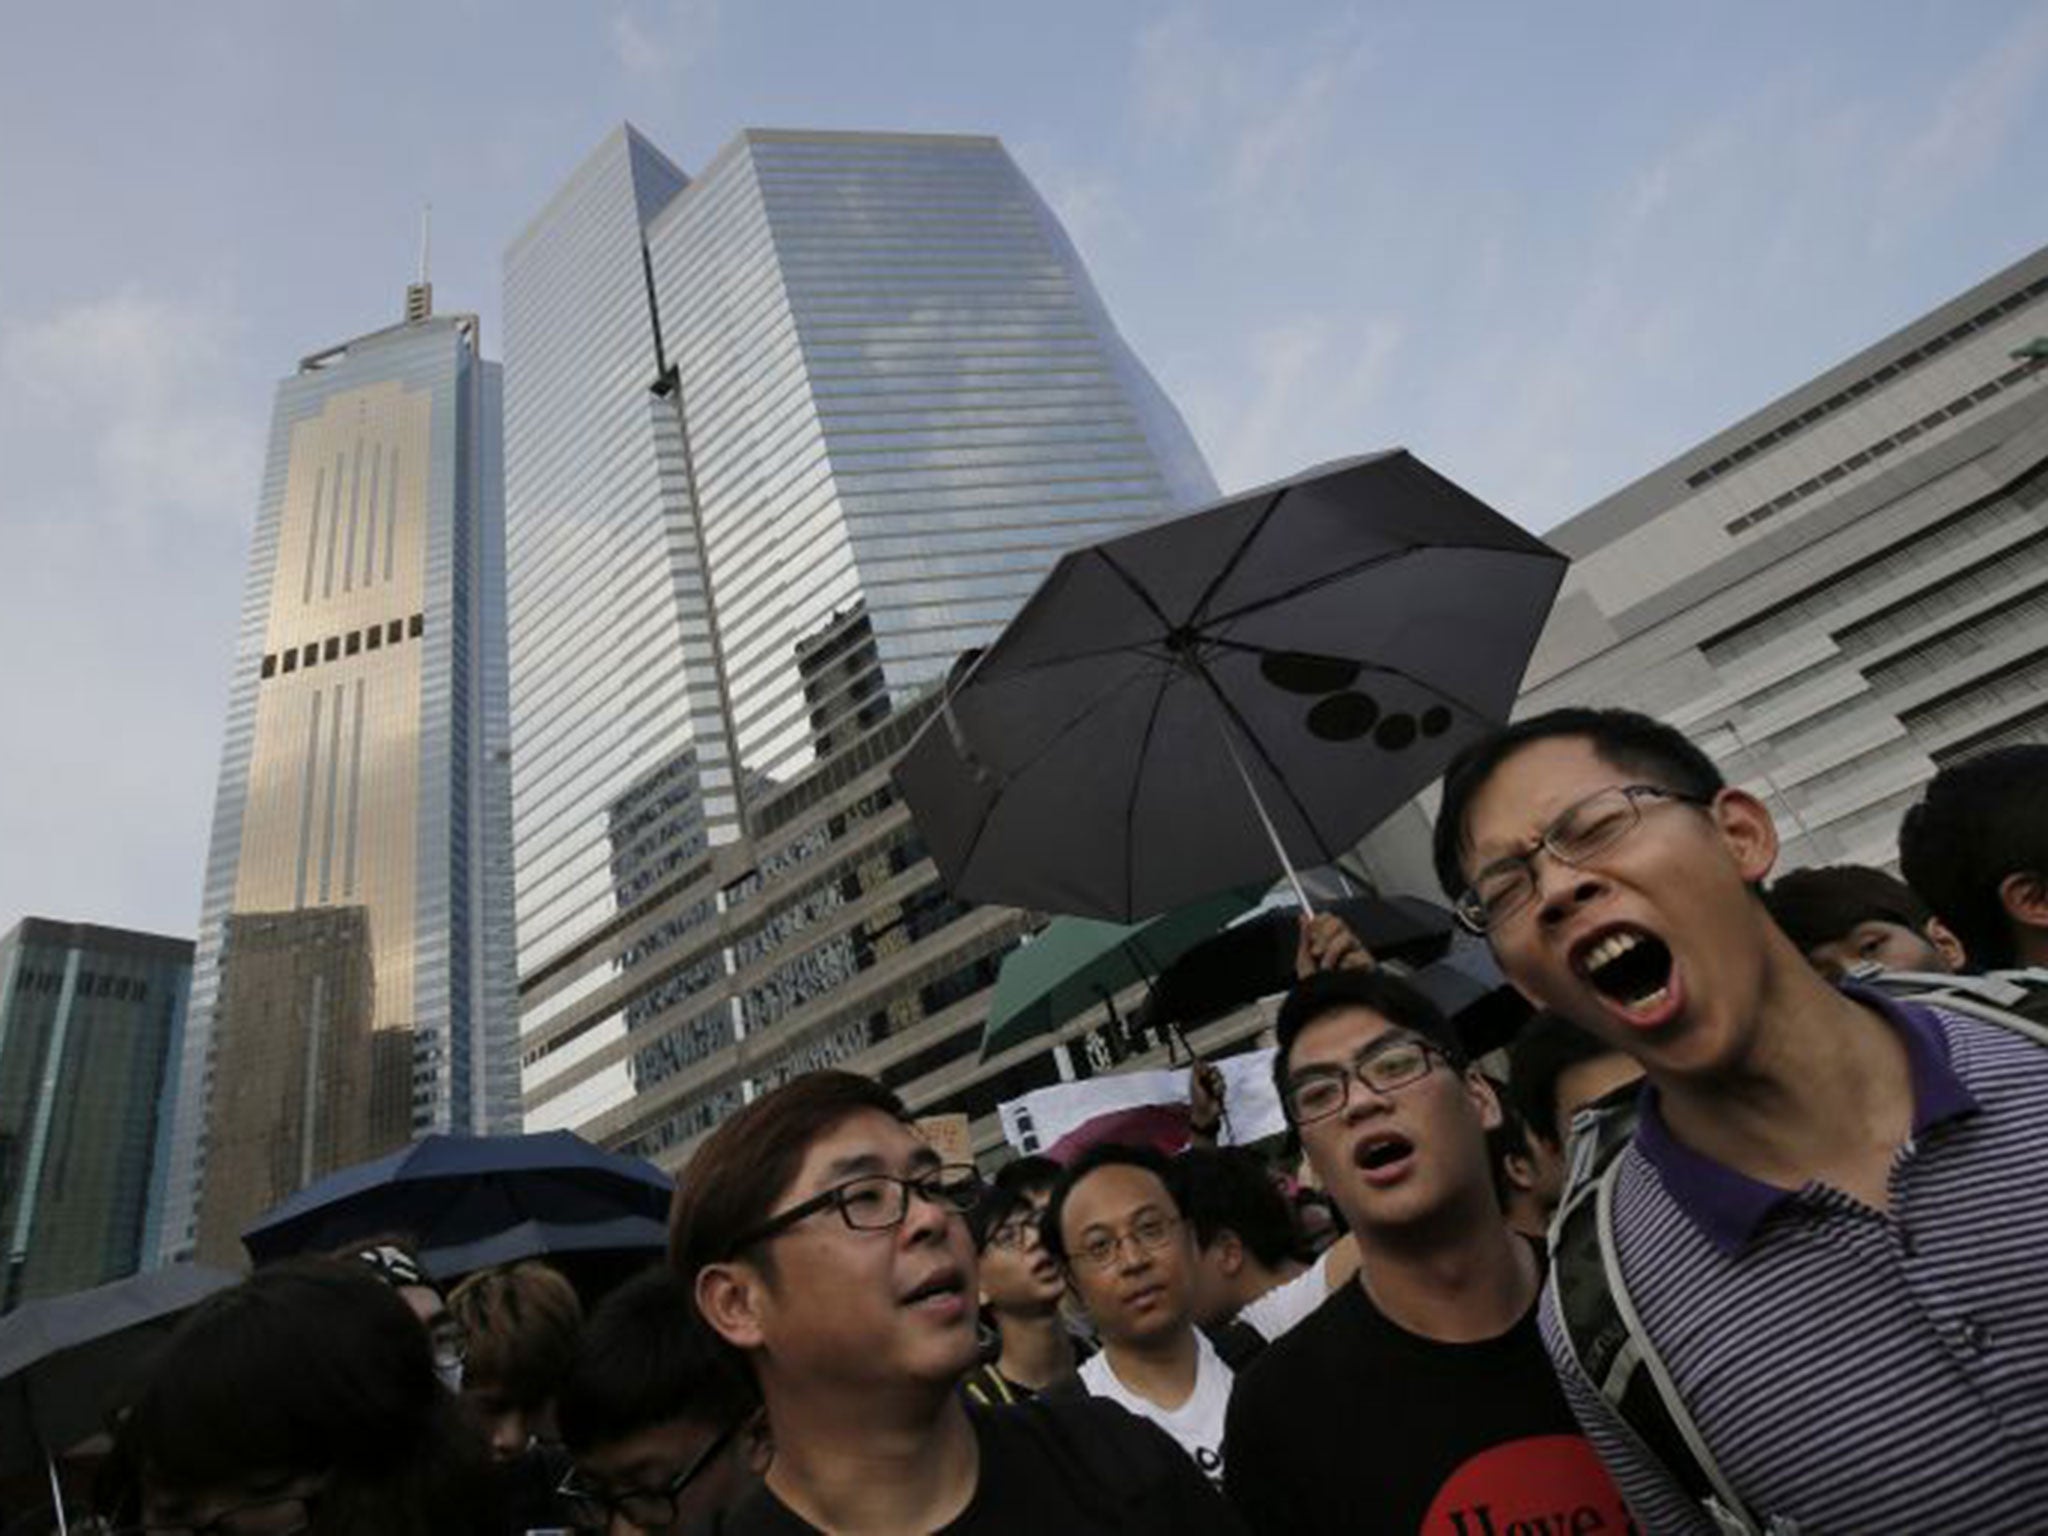 Tens of thousands of protesters occupied the streets of Hong Kong during China’s National Day